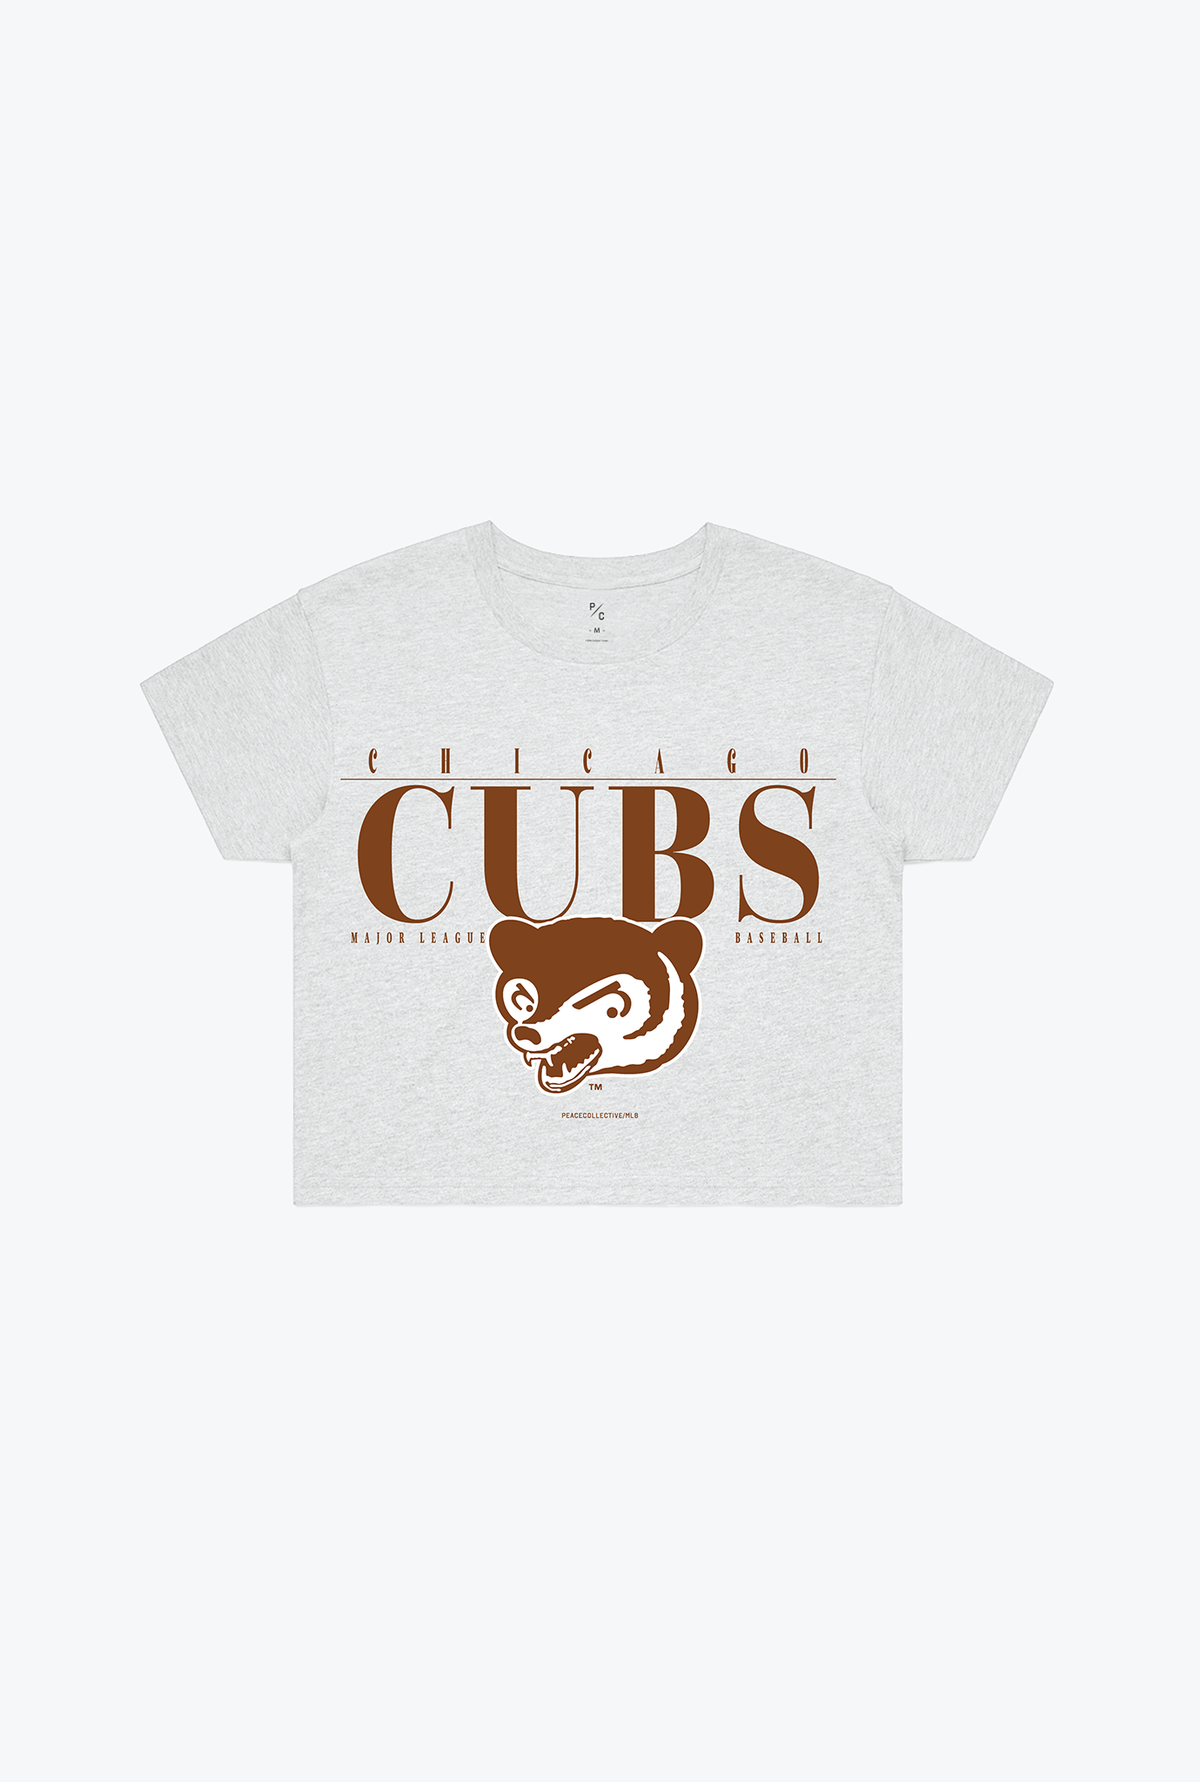 Chicago Cubs Throwback Cropped T-Shirt - Ash